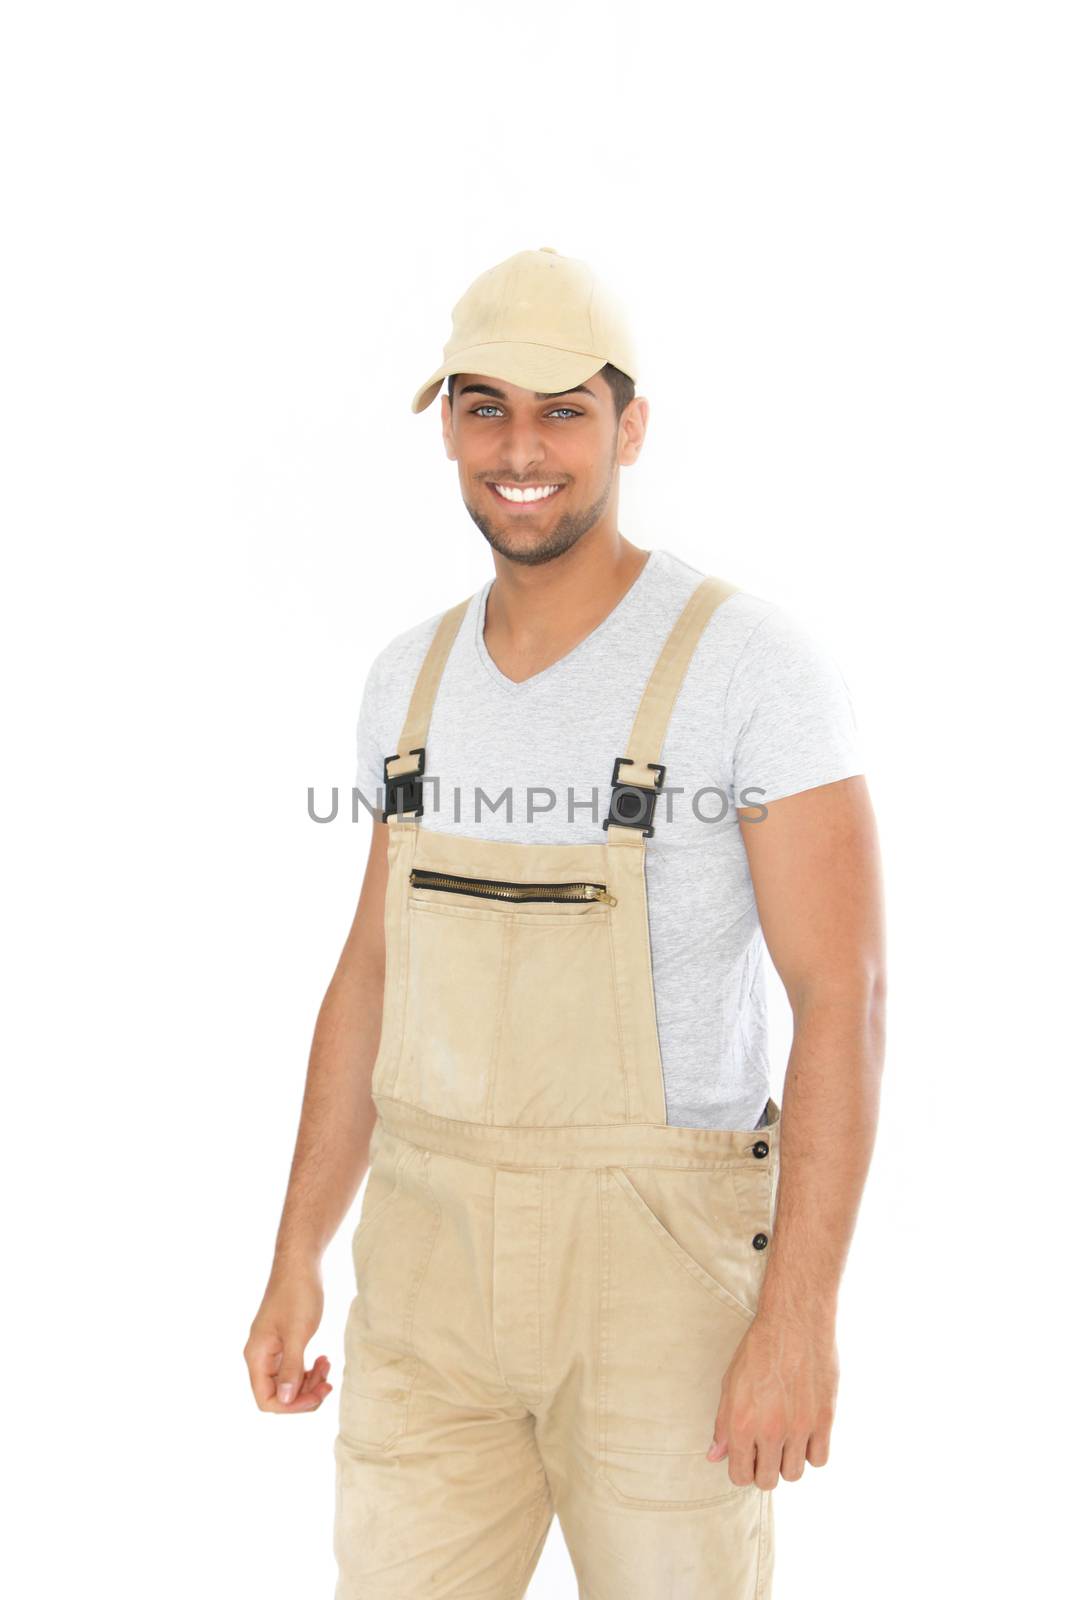 Smiling handsome man in dungarees and cap by Farina6000